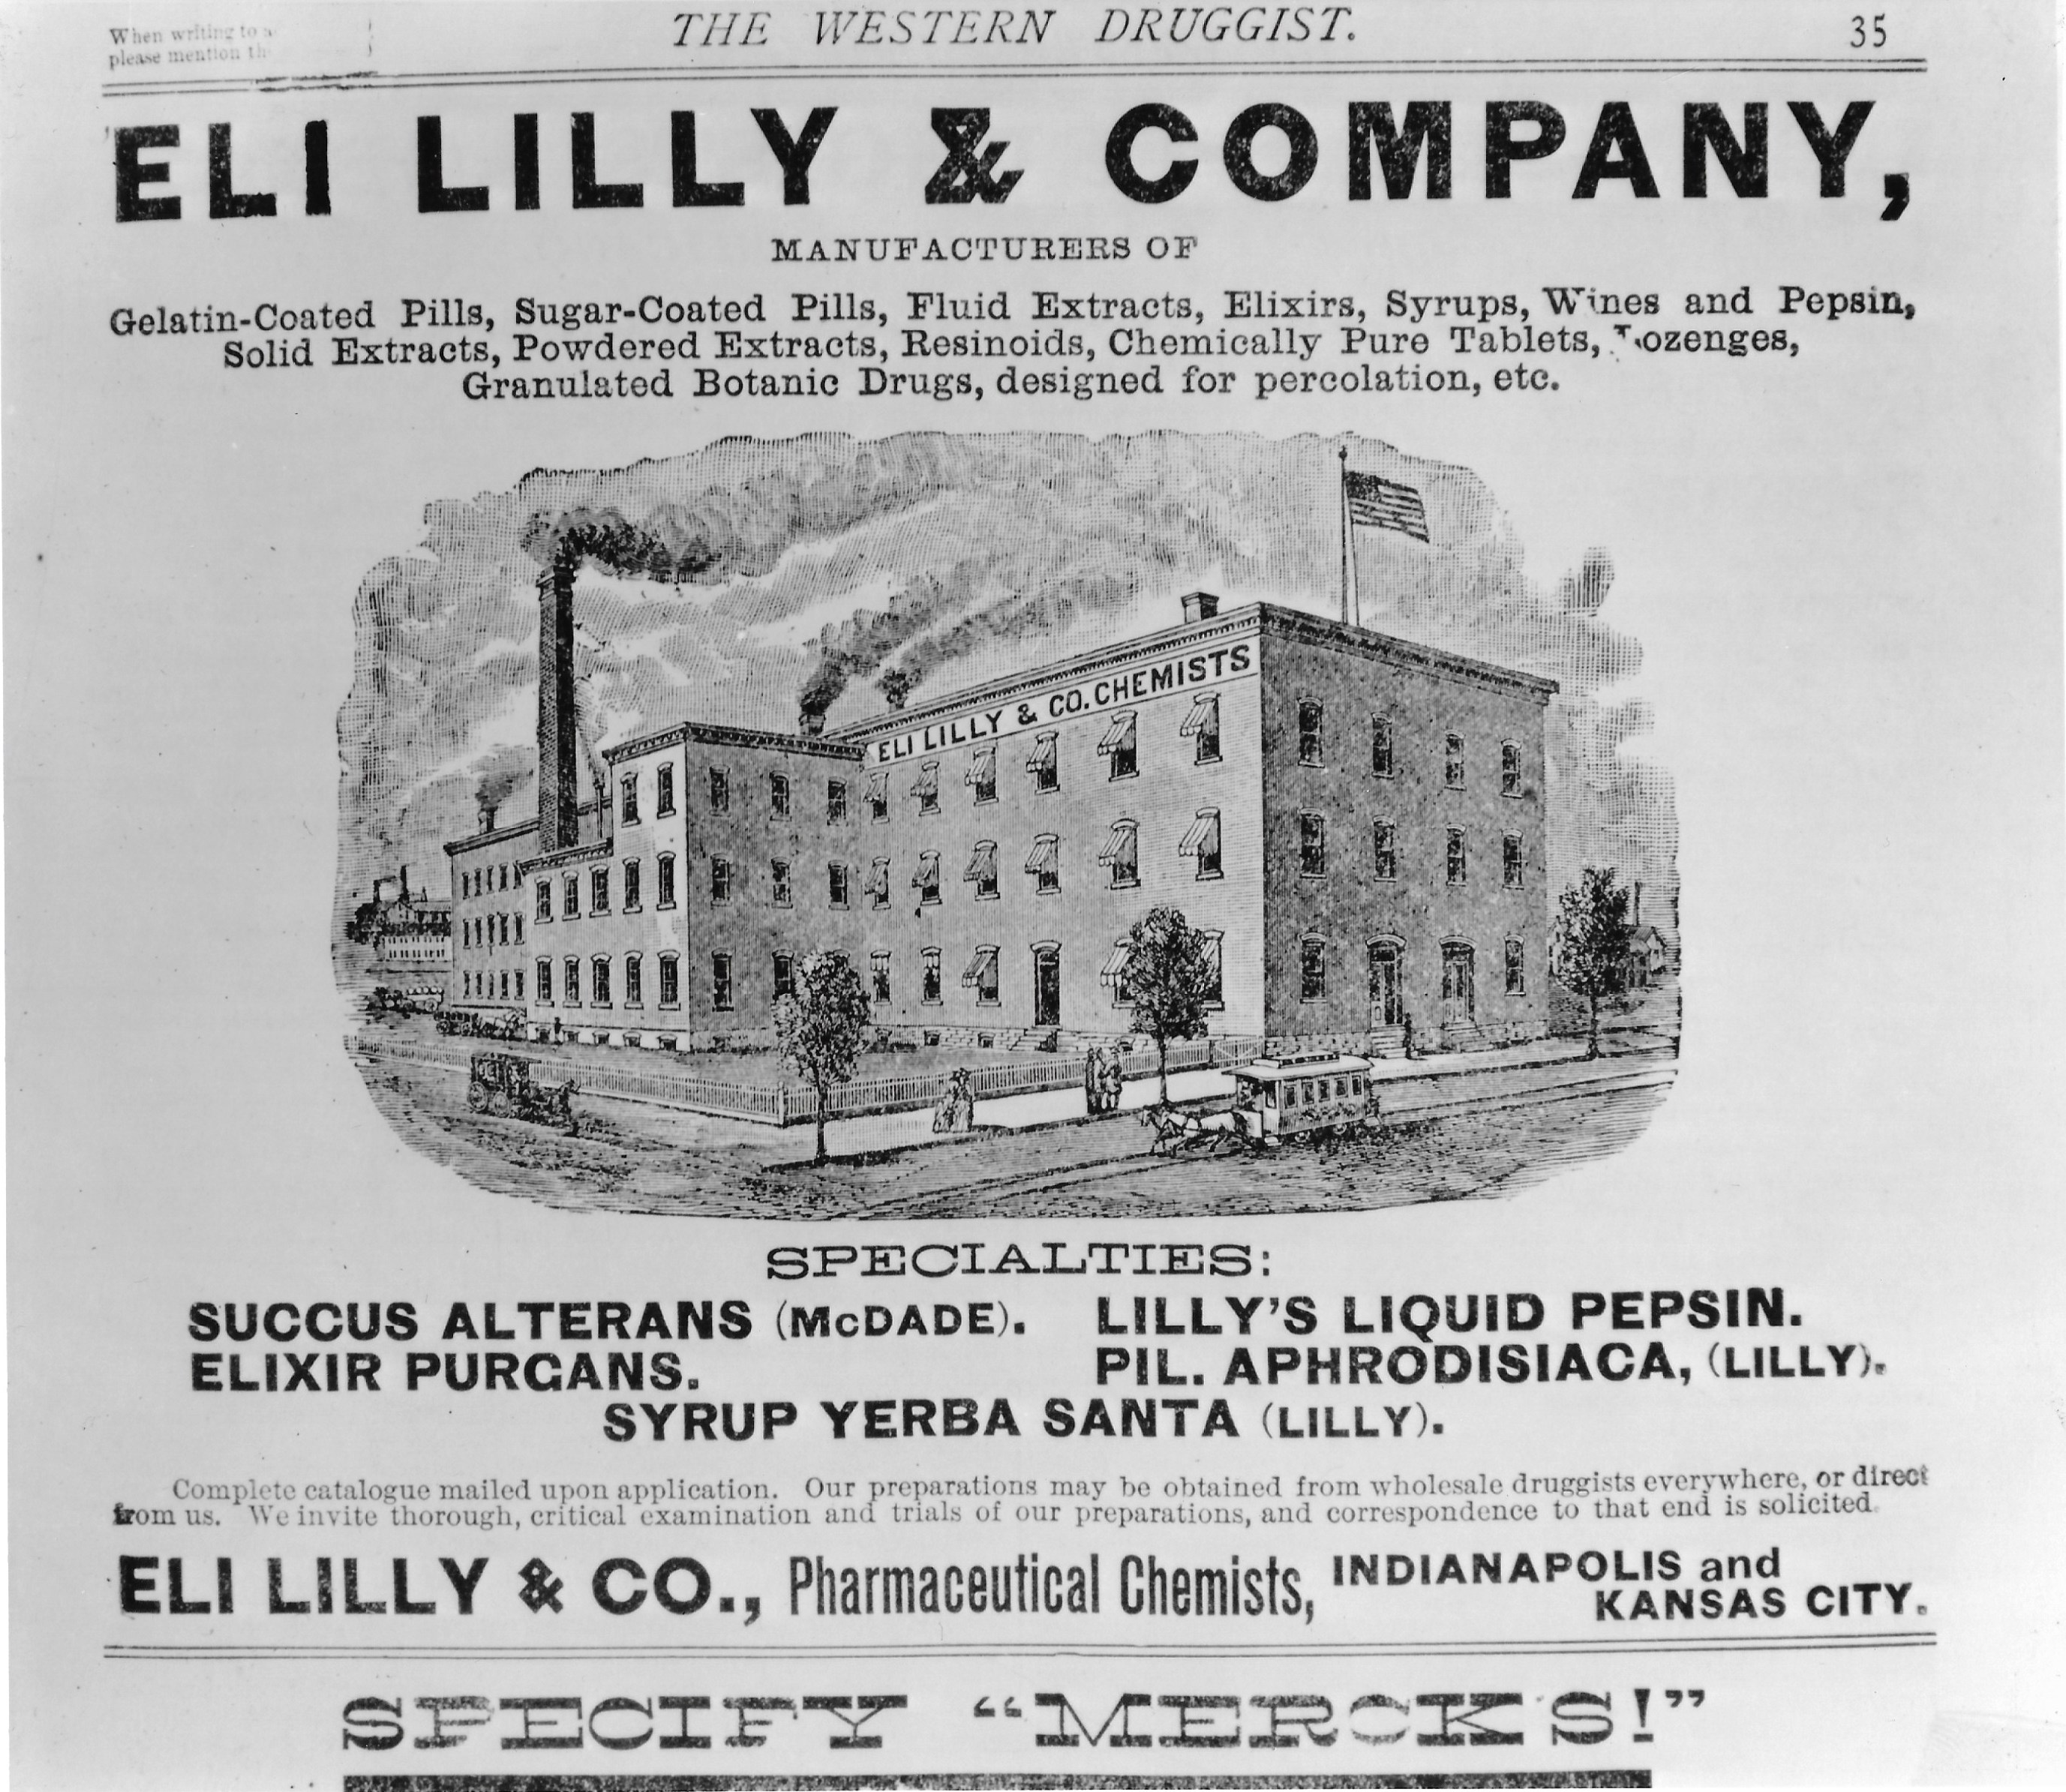 An advertisement for Eli Lilly featuring an illustration of the factory building and a list of products.. 